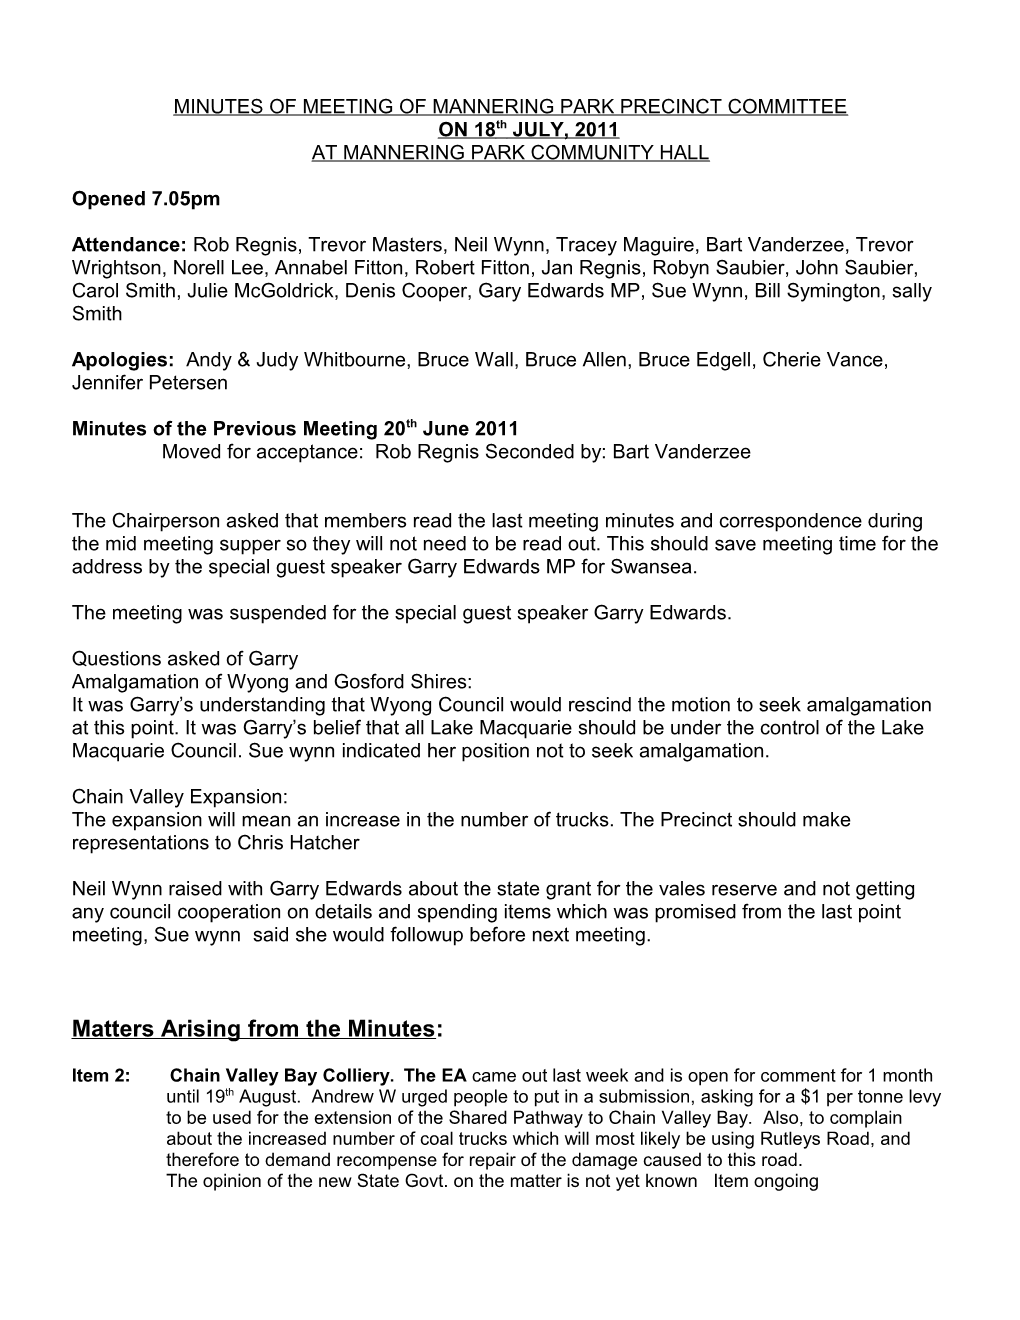 MINUTES of MEETING of MANNERING PARK PRECINCT COMMITTEE on 18Thjuly, 2011